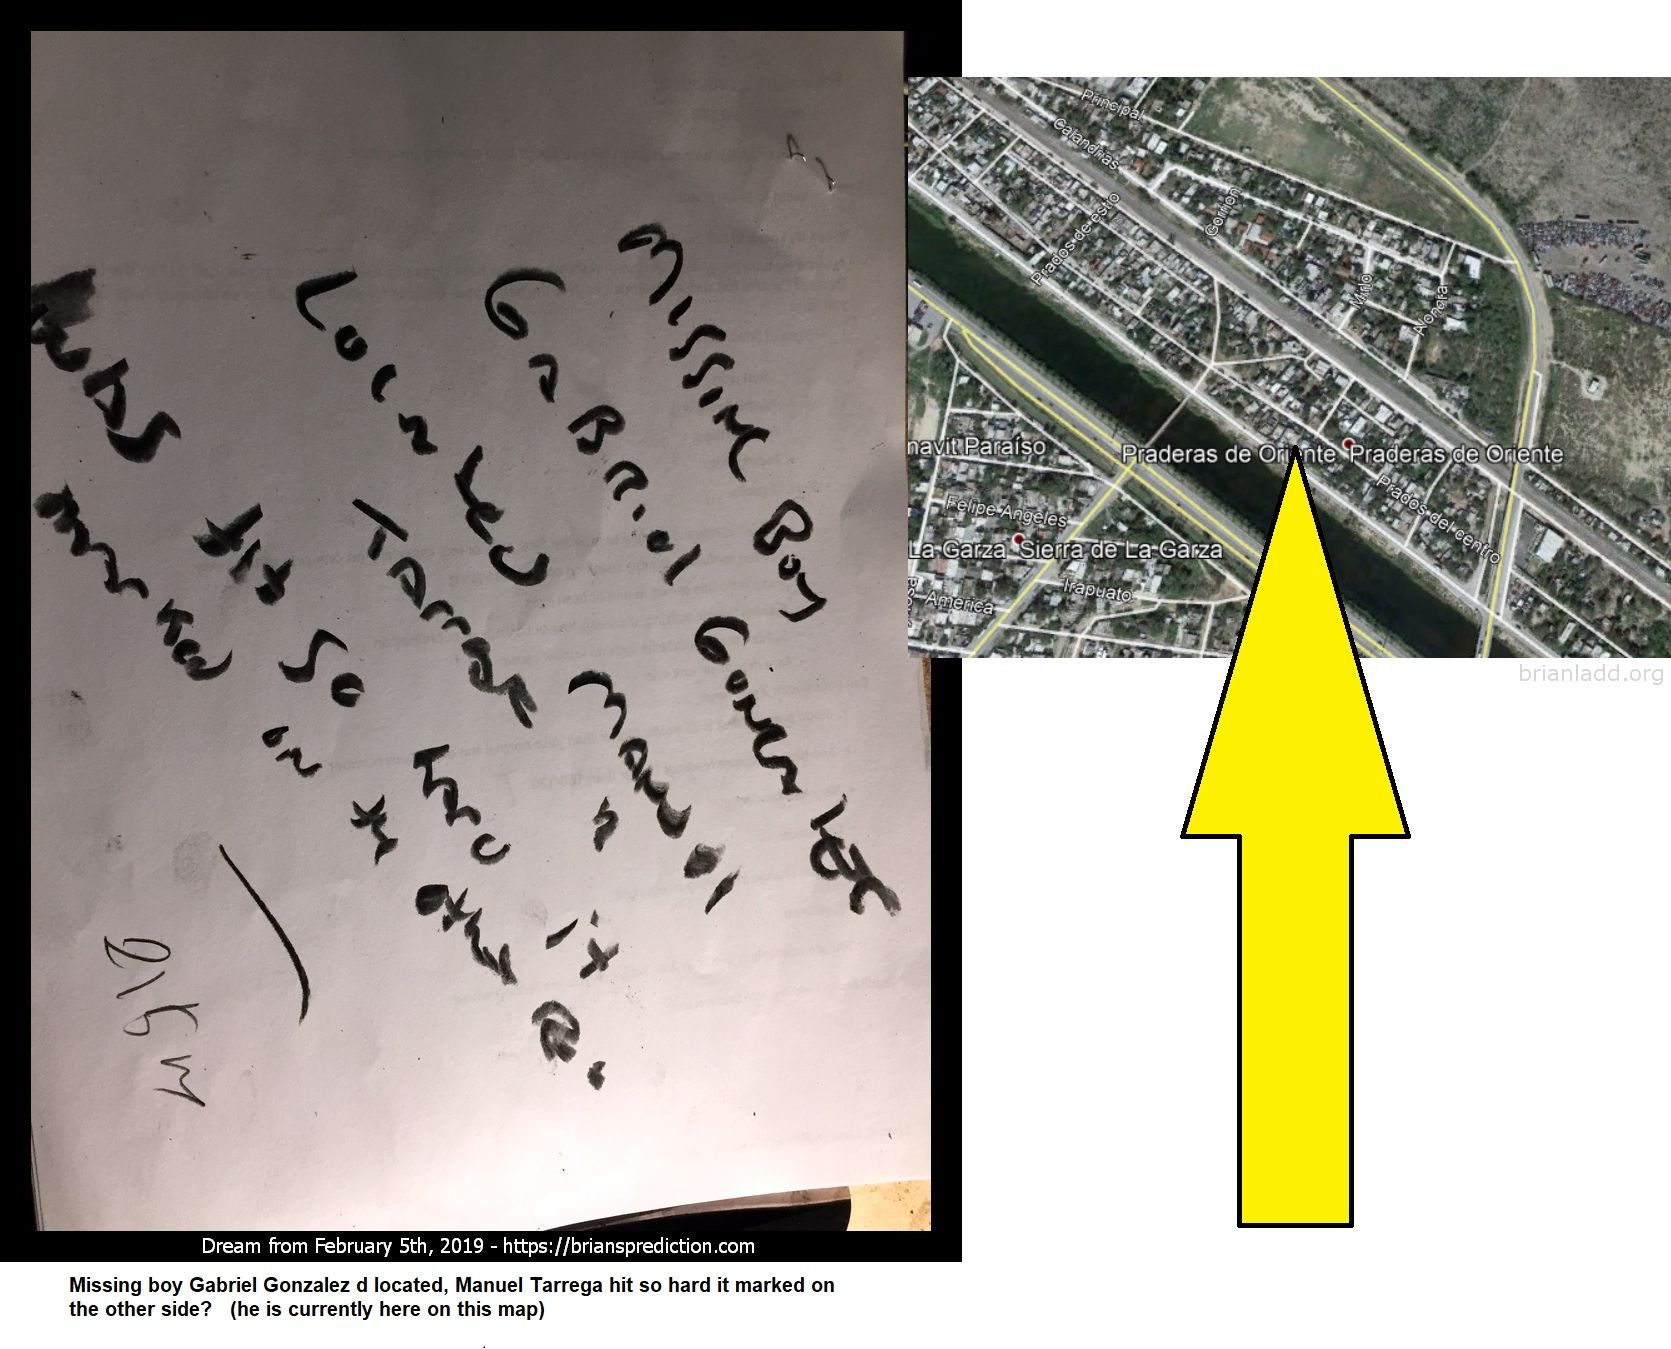 11677 5 February 2019 5 - Missing Boy Gabriel Gonzalez D Located, Manuel Tarrega Hit So Hard It Marked On The Other Side...
Missing Boy Gabriel Gonzalez D Located, Manuel Tarrega Hit So Hard It Marked On The Other Side?  (he Is Currently Here On This Map)  Dream Number 11677 5 February 2019 5 Psychic Prediction
